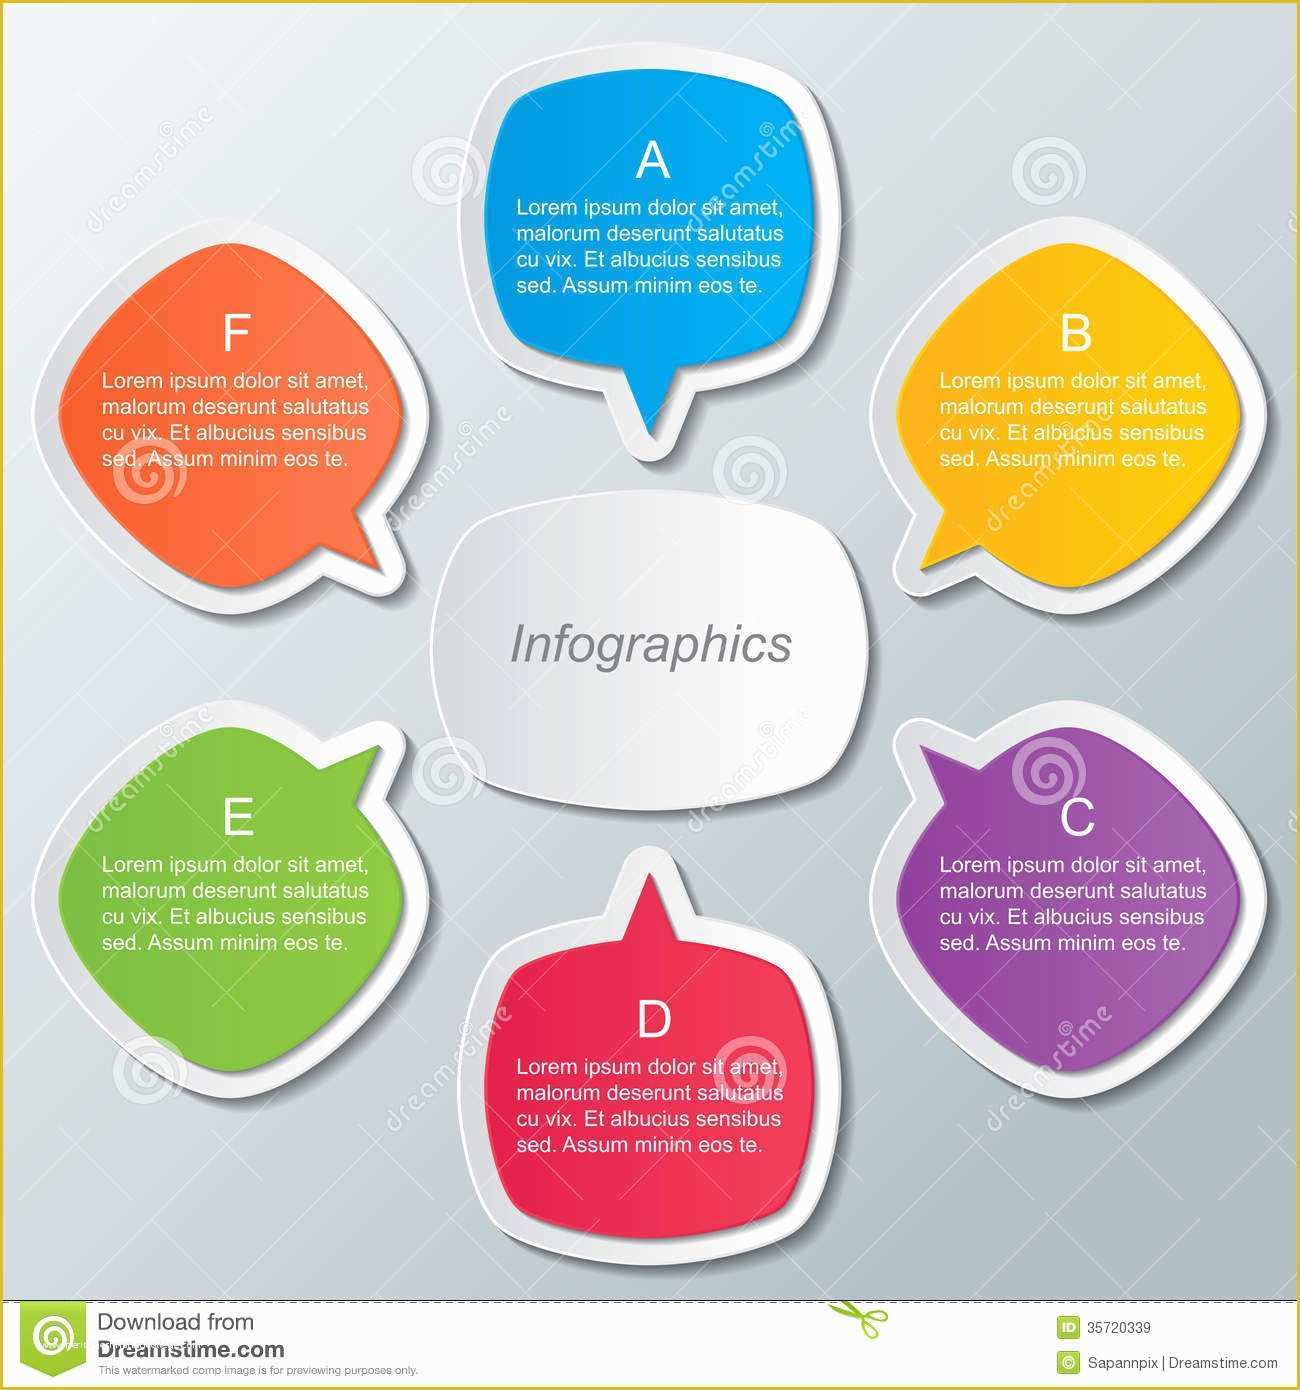 free best infographic powerpoint templates download